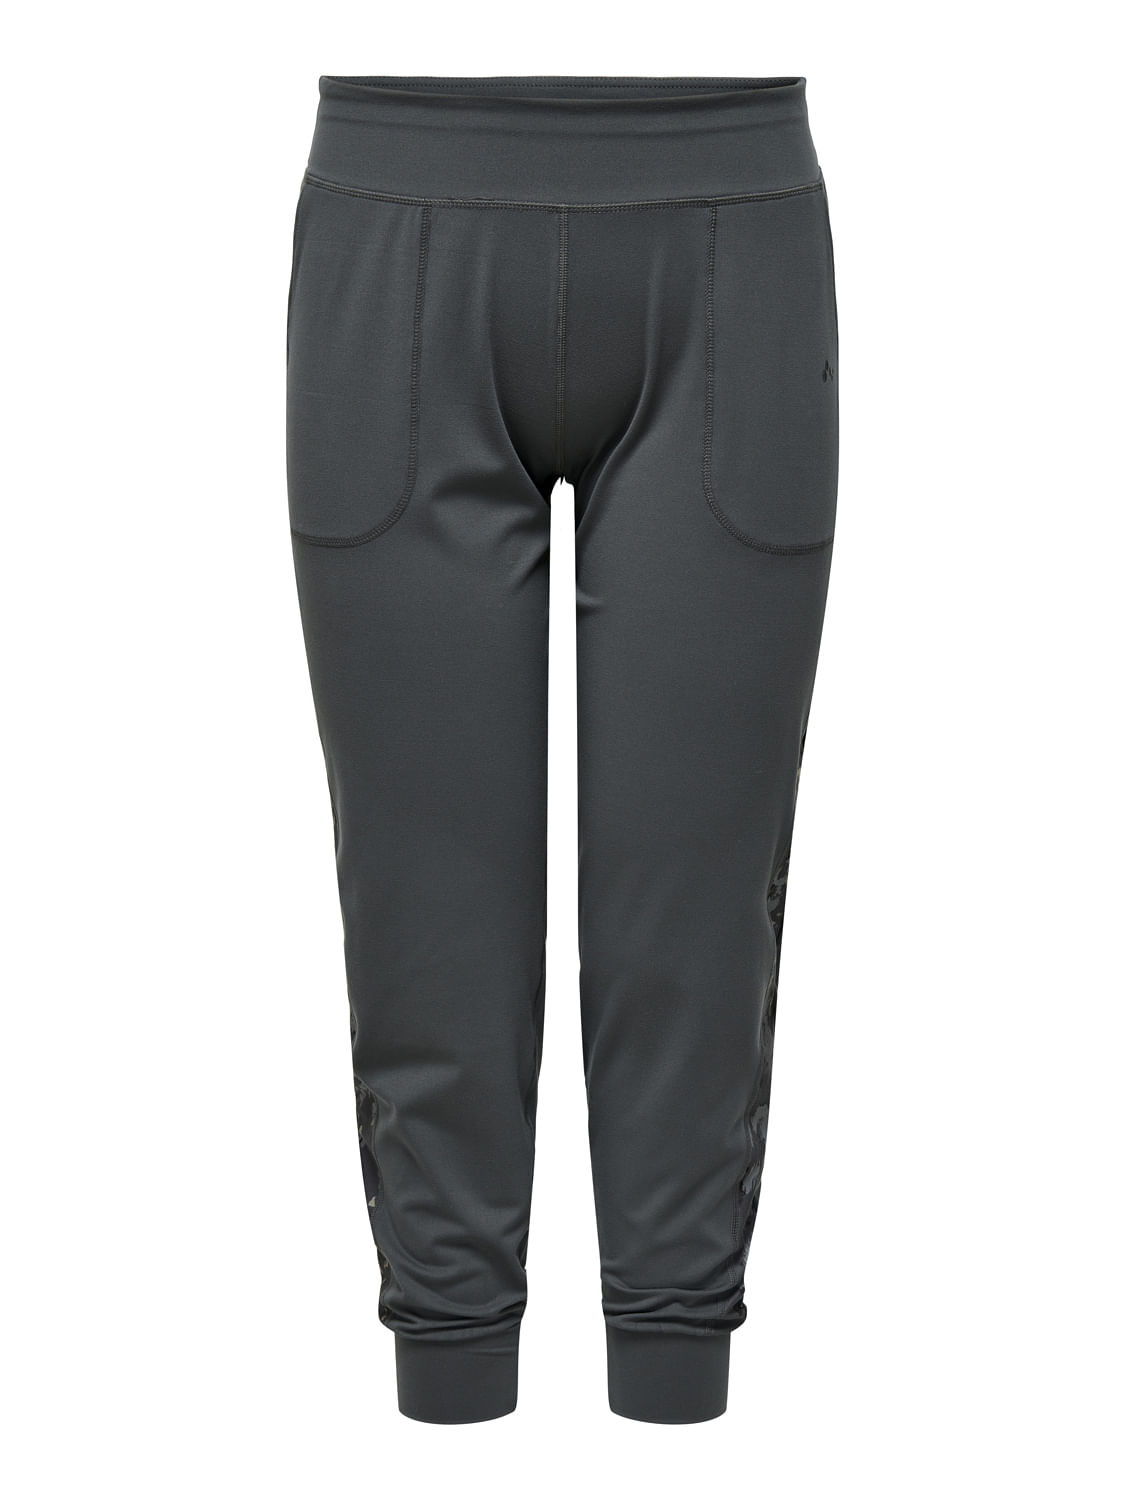 Shop joggers and cargo pants for women online  Go Colors